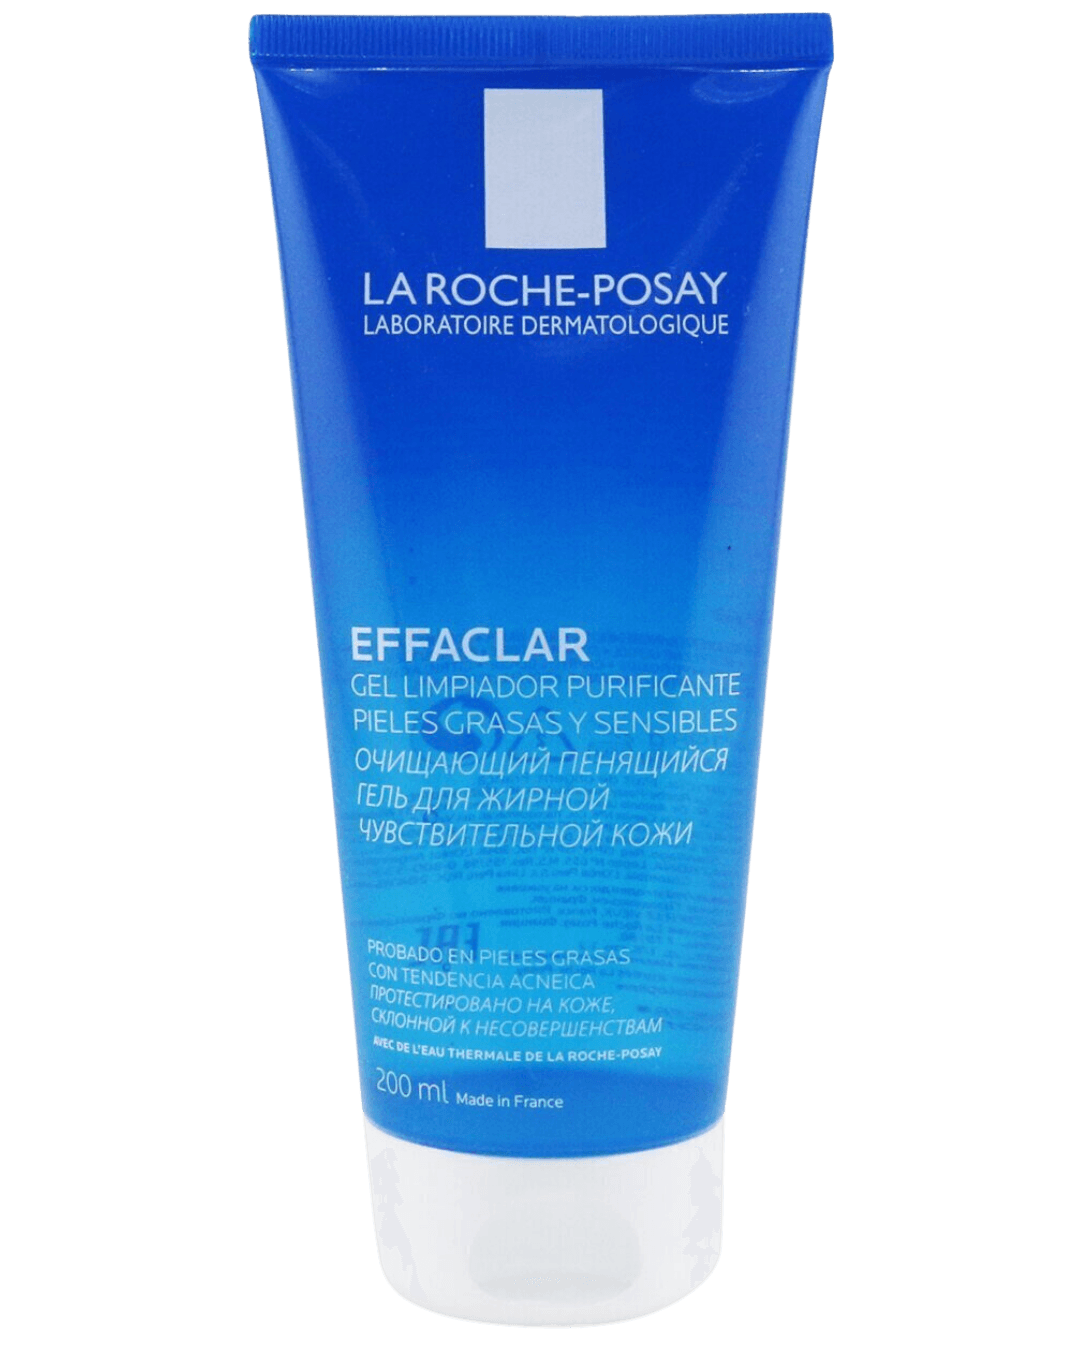 Daily Vanity Beauty Awards 2024 Best  La Roche-Posay Effaclar Purifying Foaming Gel Cleanser Voted By Beauty Experts